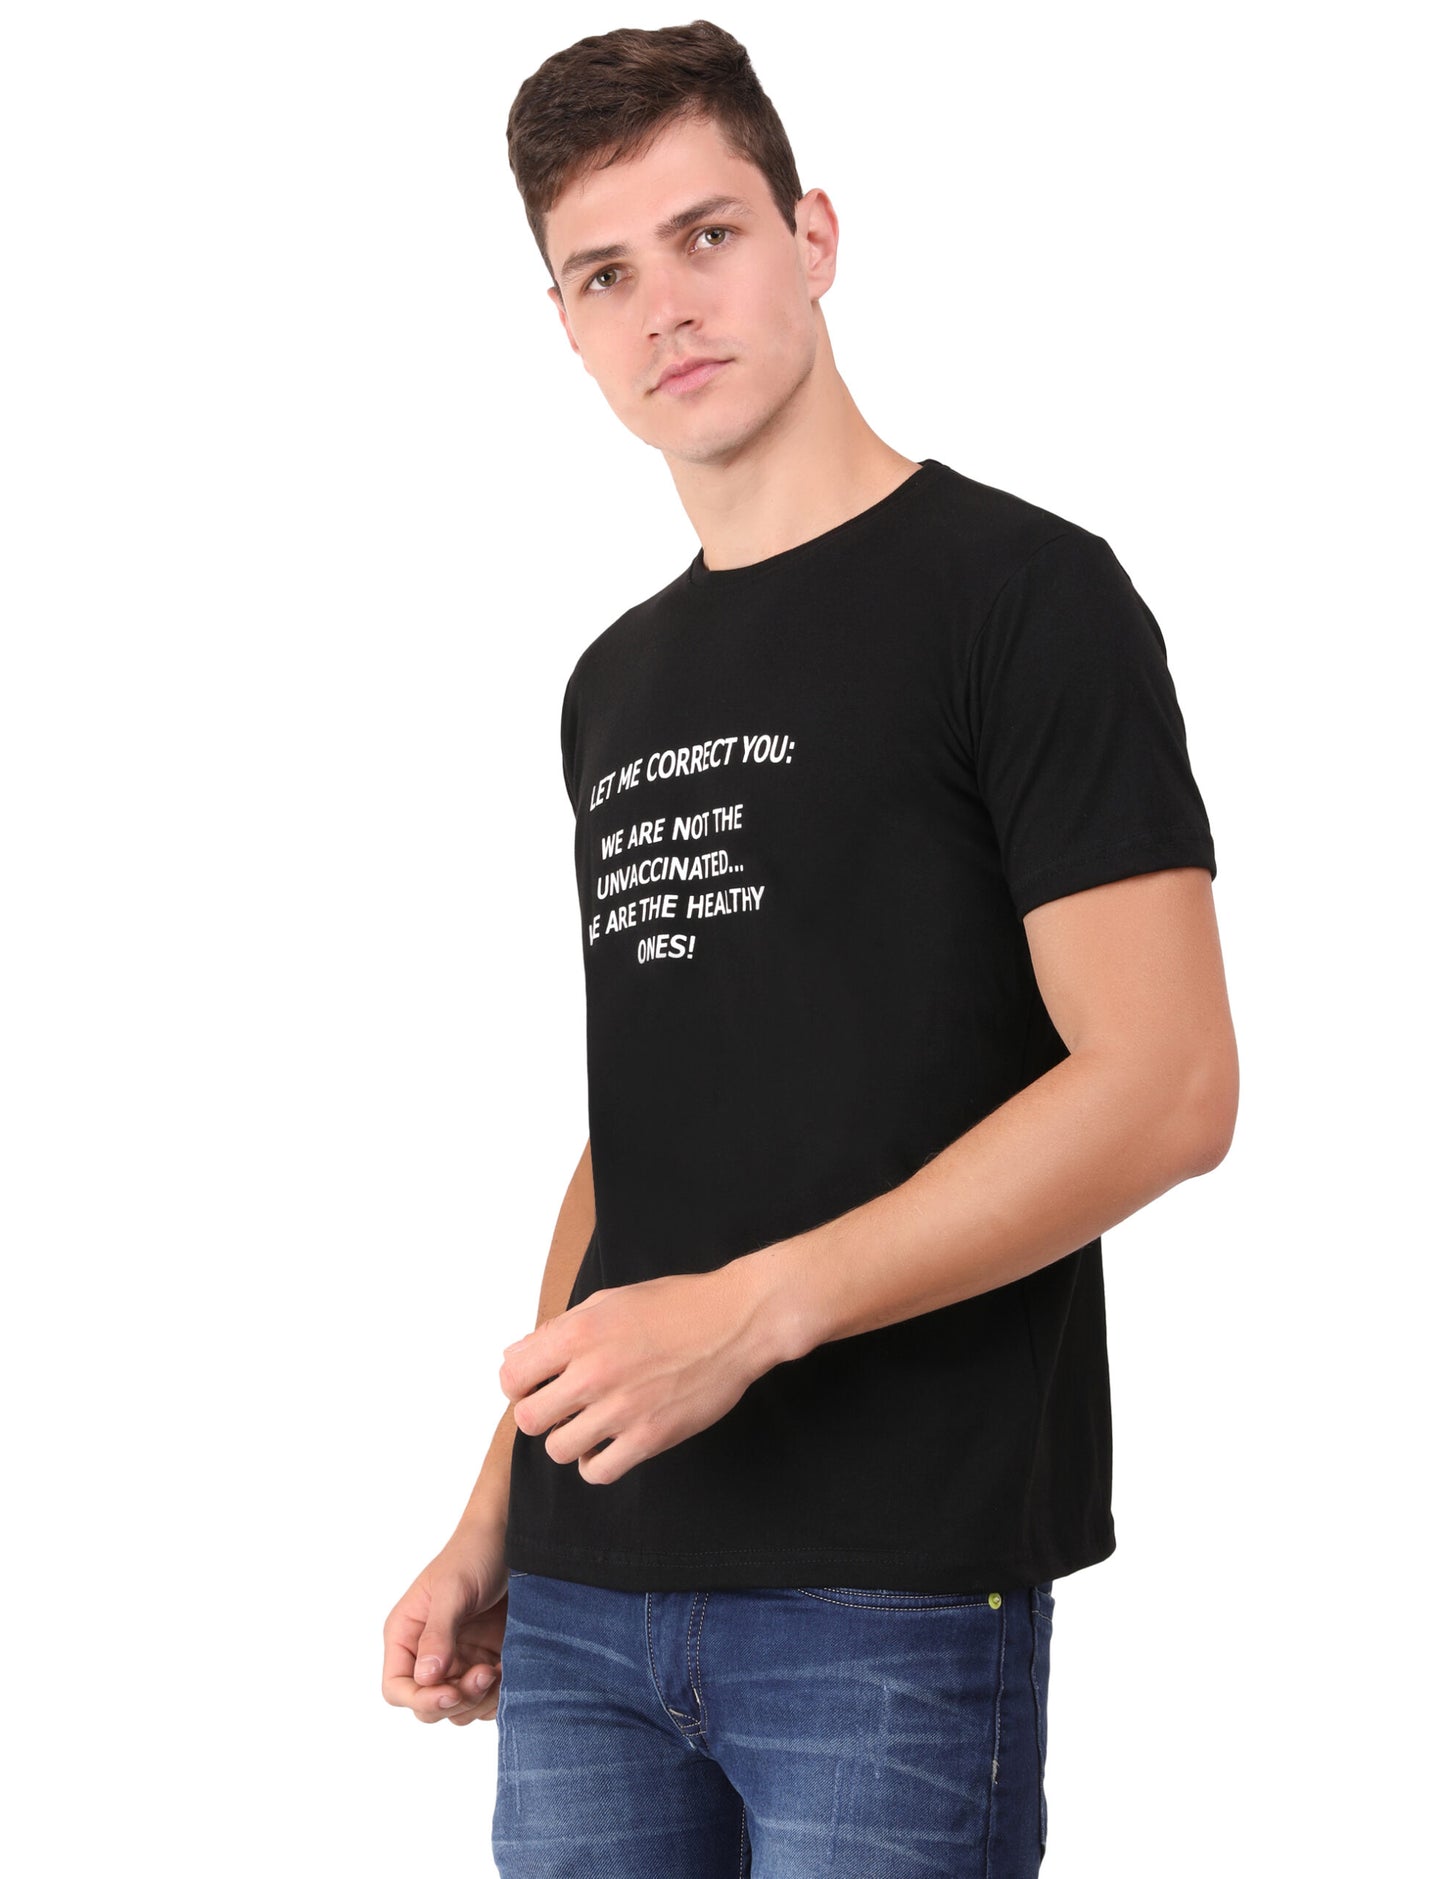 Let Me Correct You : We Are Not The Unvaccinated… We Are The Healthy Ones! Authentic Cotton Black T-Shirt